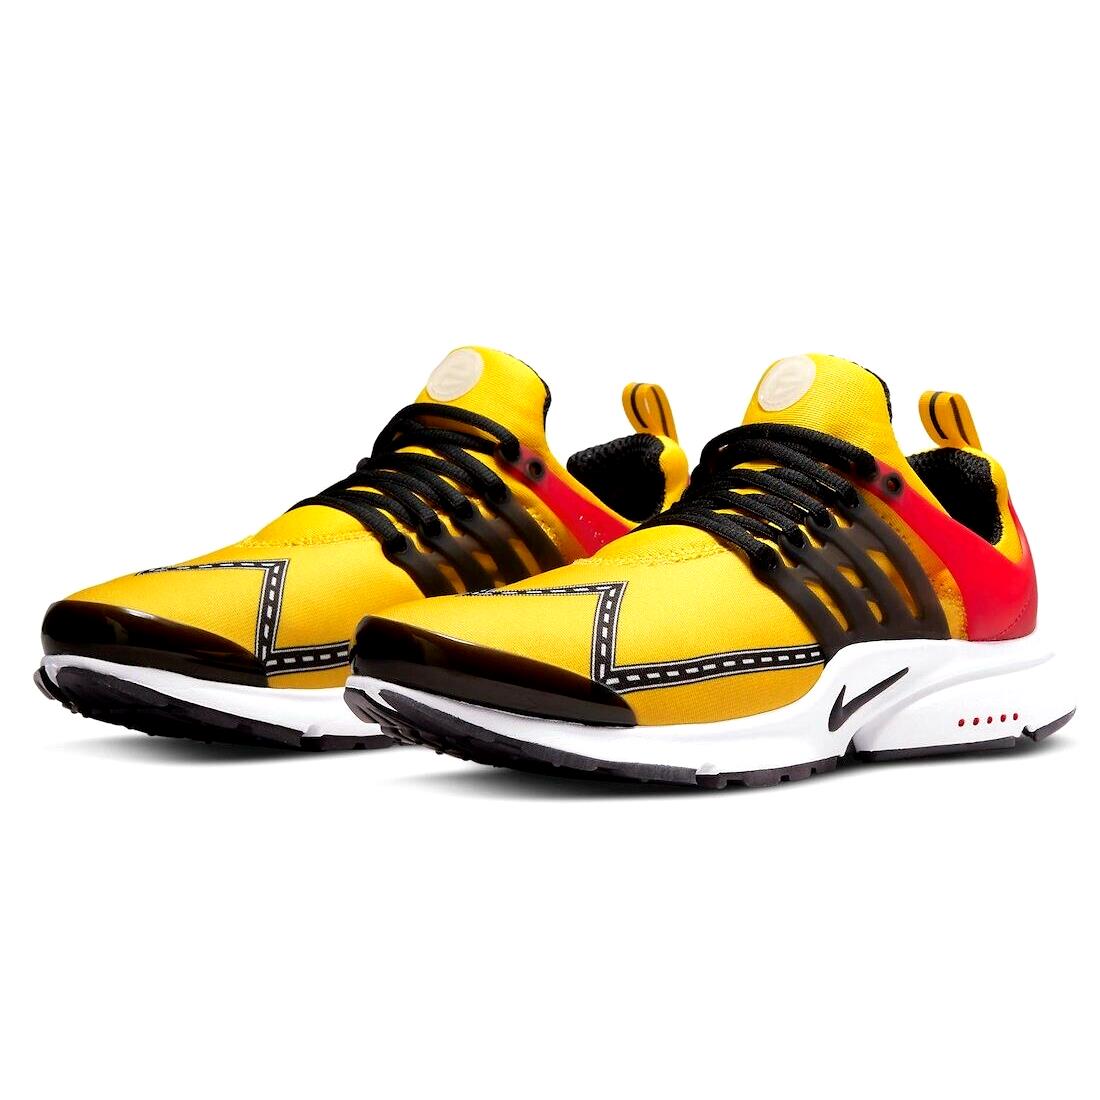 Nike Air Presto Mens Size 11 Sneaker Shoes CT3550 700 Road Race Speed Yellow - Yellow